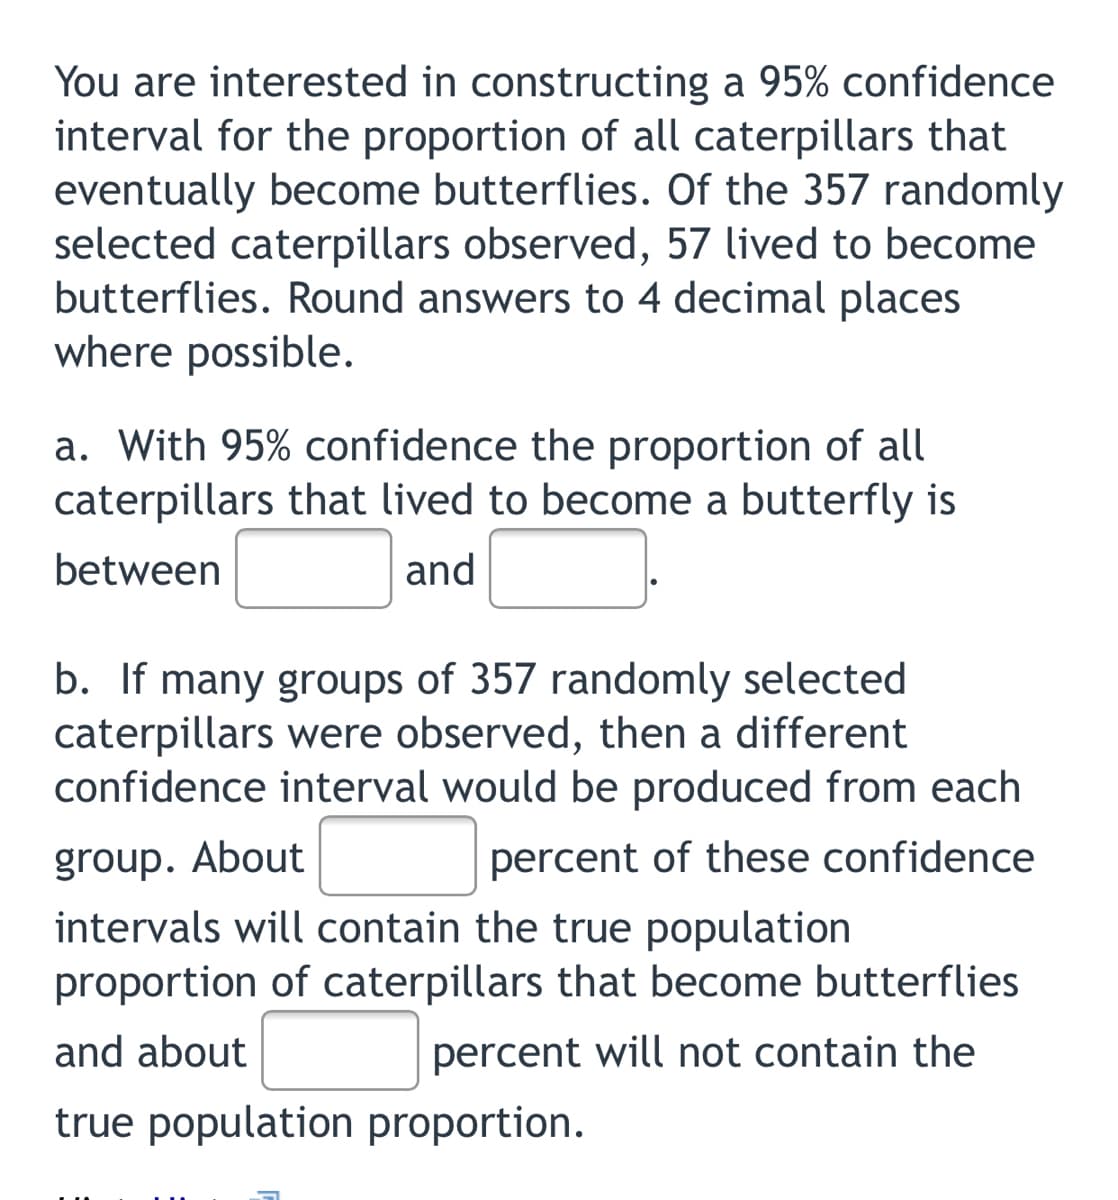 You are interested in constructing a 95% confidence
interval for the proportion of all caterpillars that
eventually become butterflies. Of the 357 randomly
selected caterpillars observed, 57 lived to become
butterflies. Round answers to 4 decimal places
where possible.
a. With 95% confidence the proportion of all
caterpillars that lived to become a butterfly is
between
and
b. If many groups of 357 randomly selected
caterpillars were observed, then a different
confidence interval would be produced from each
group. About
percent of these confidence
intervals will contain the true population
proportion of caterpillars that become butterflies
and about
percent will not contain the
true population proportion.
